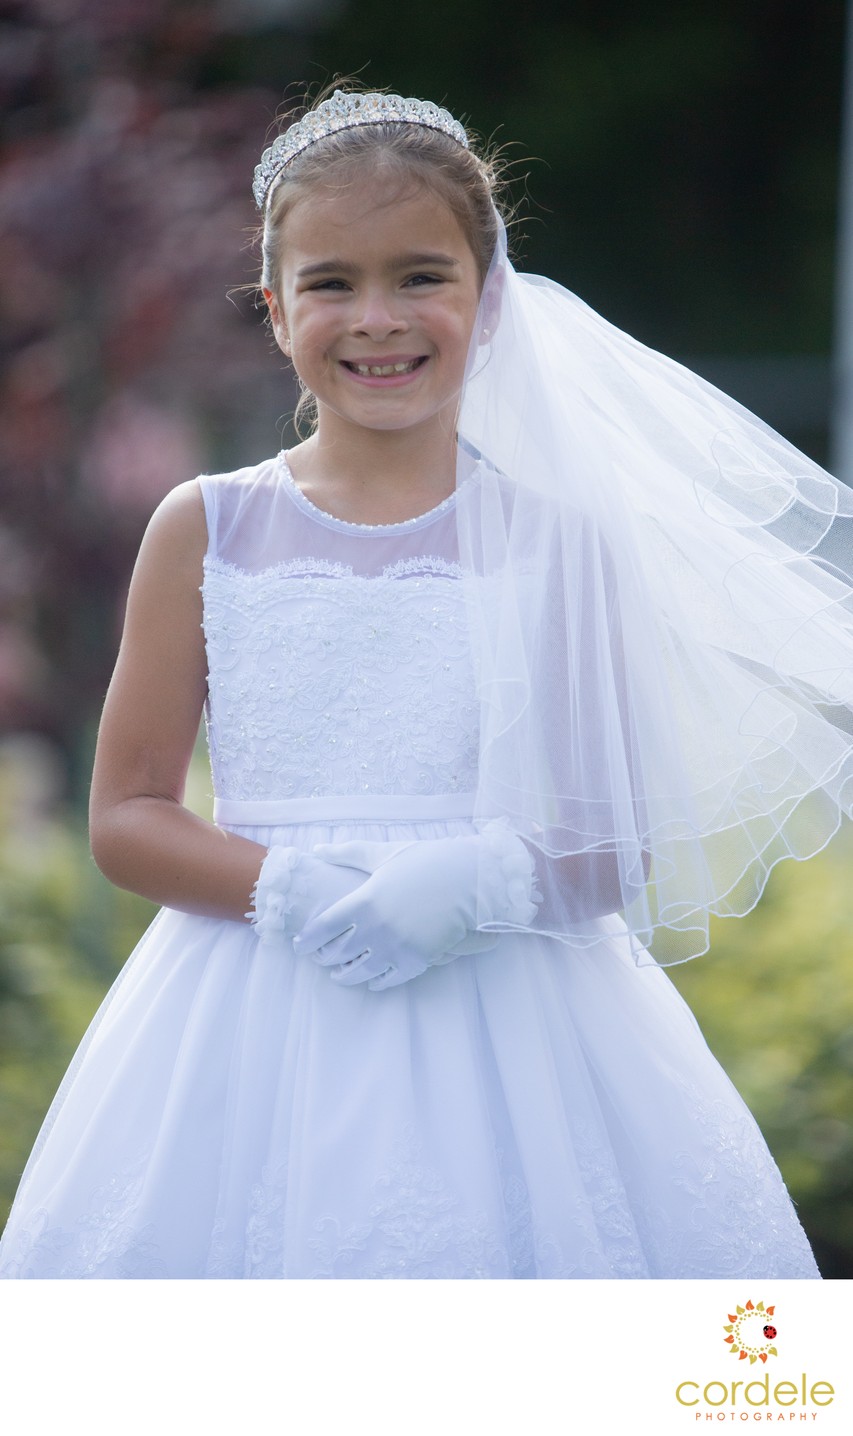 First Communion Photographer in North Reading